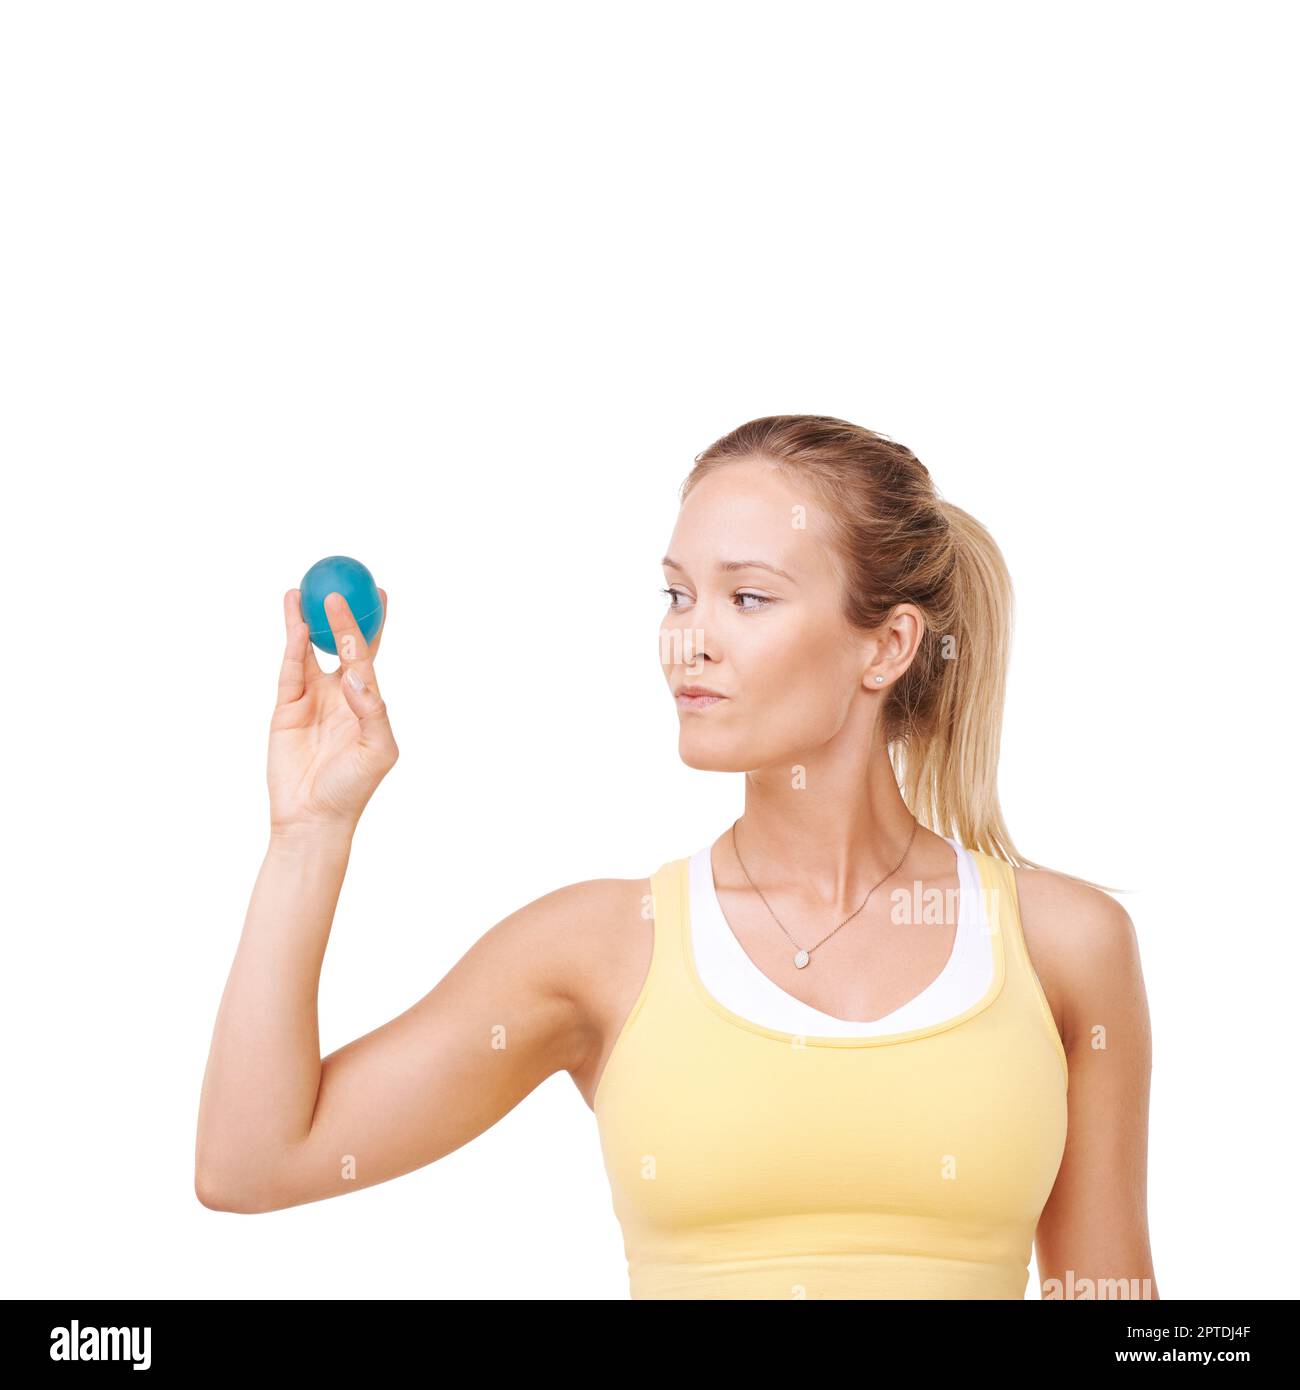 Getting rid of all her tension. Cropped view of a woman squeezing a stress ball against a white background Stock Photo